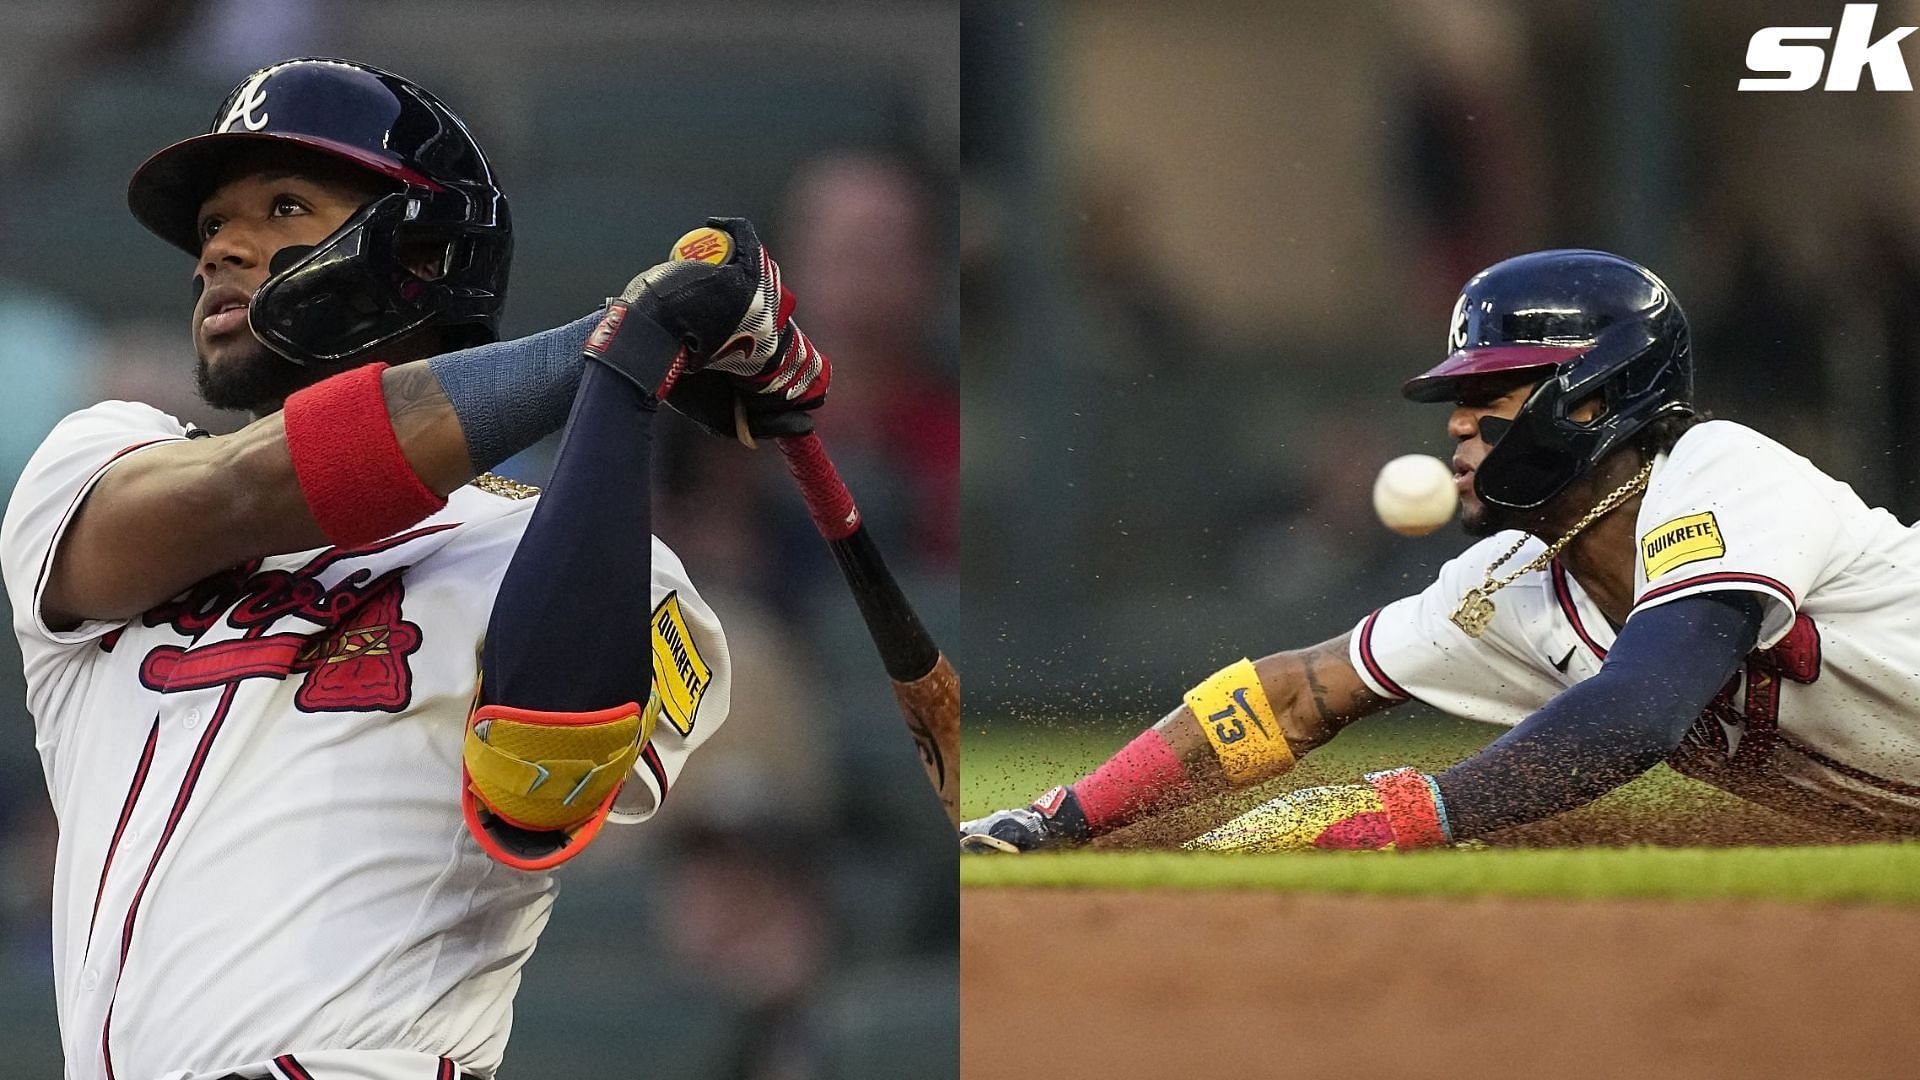 Kevin Pillar attempts to kill the 'poor defense' narrative around Braves' star  Ronald Acuna Jr: "I don't see anything wrong with his game"